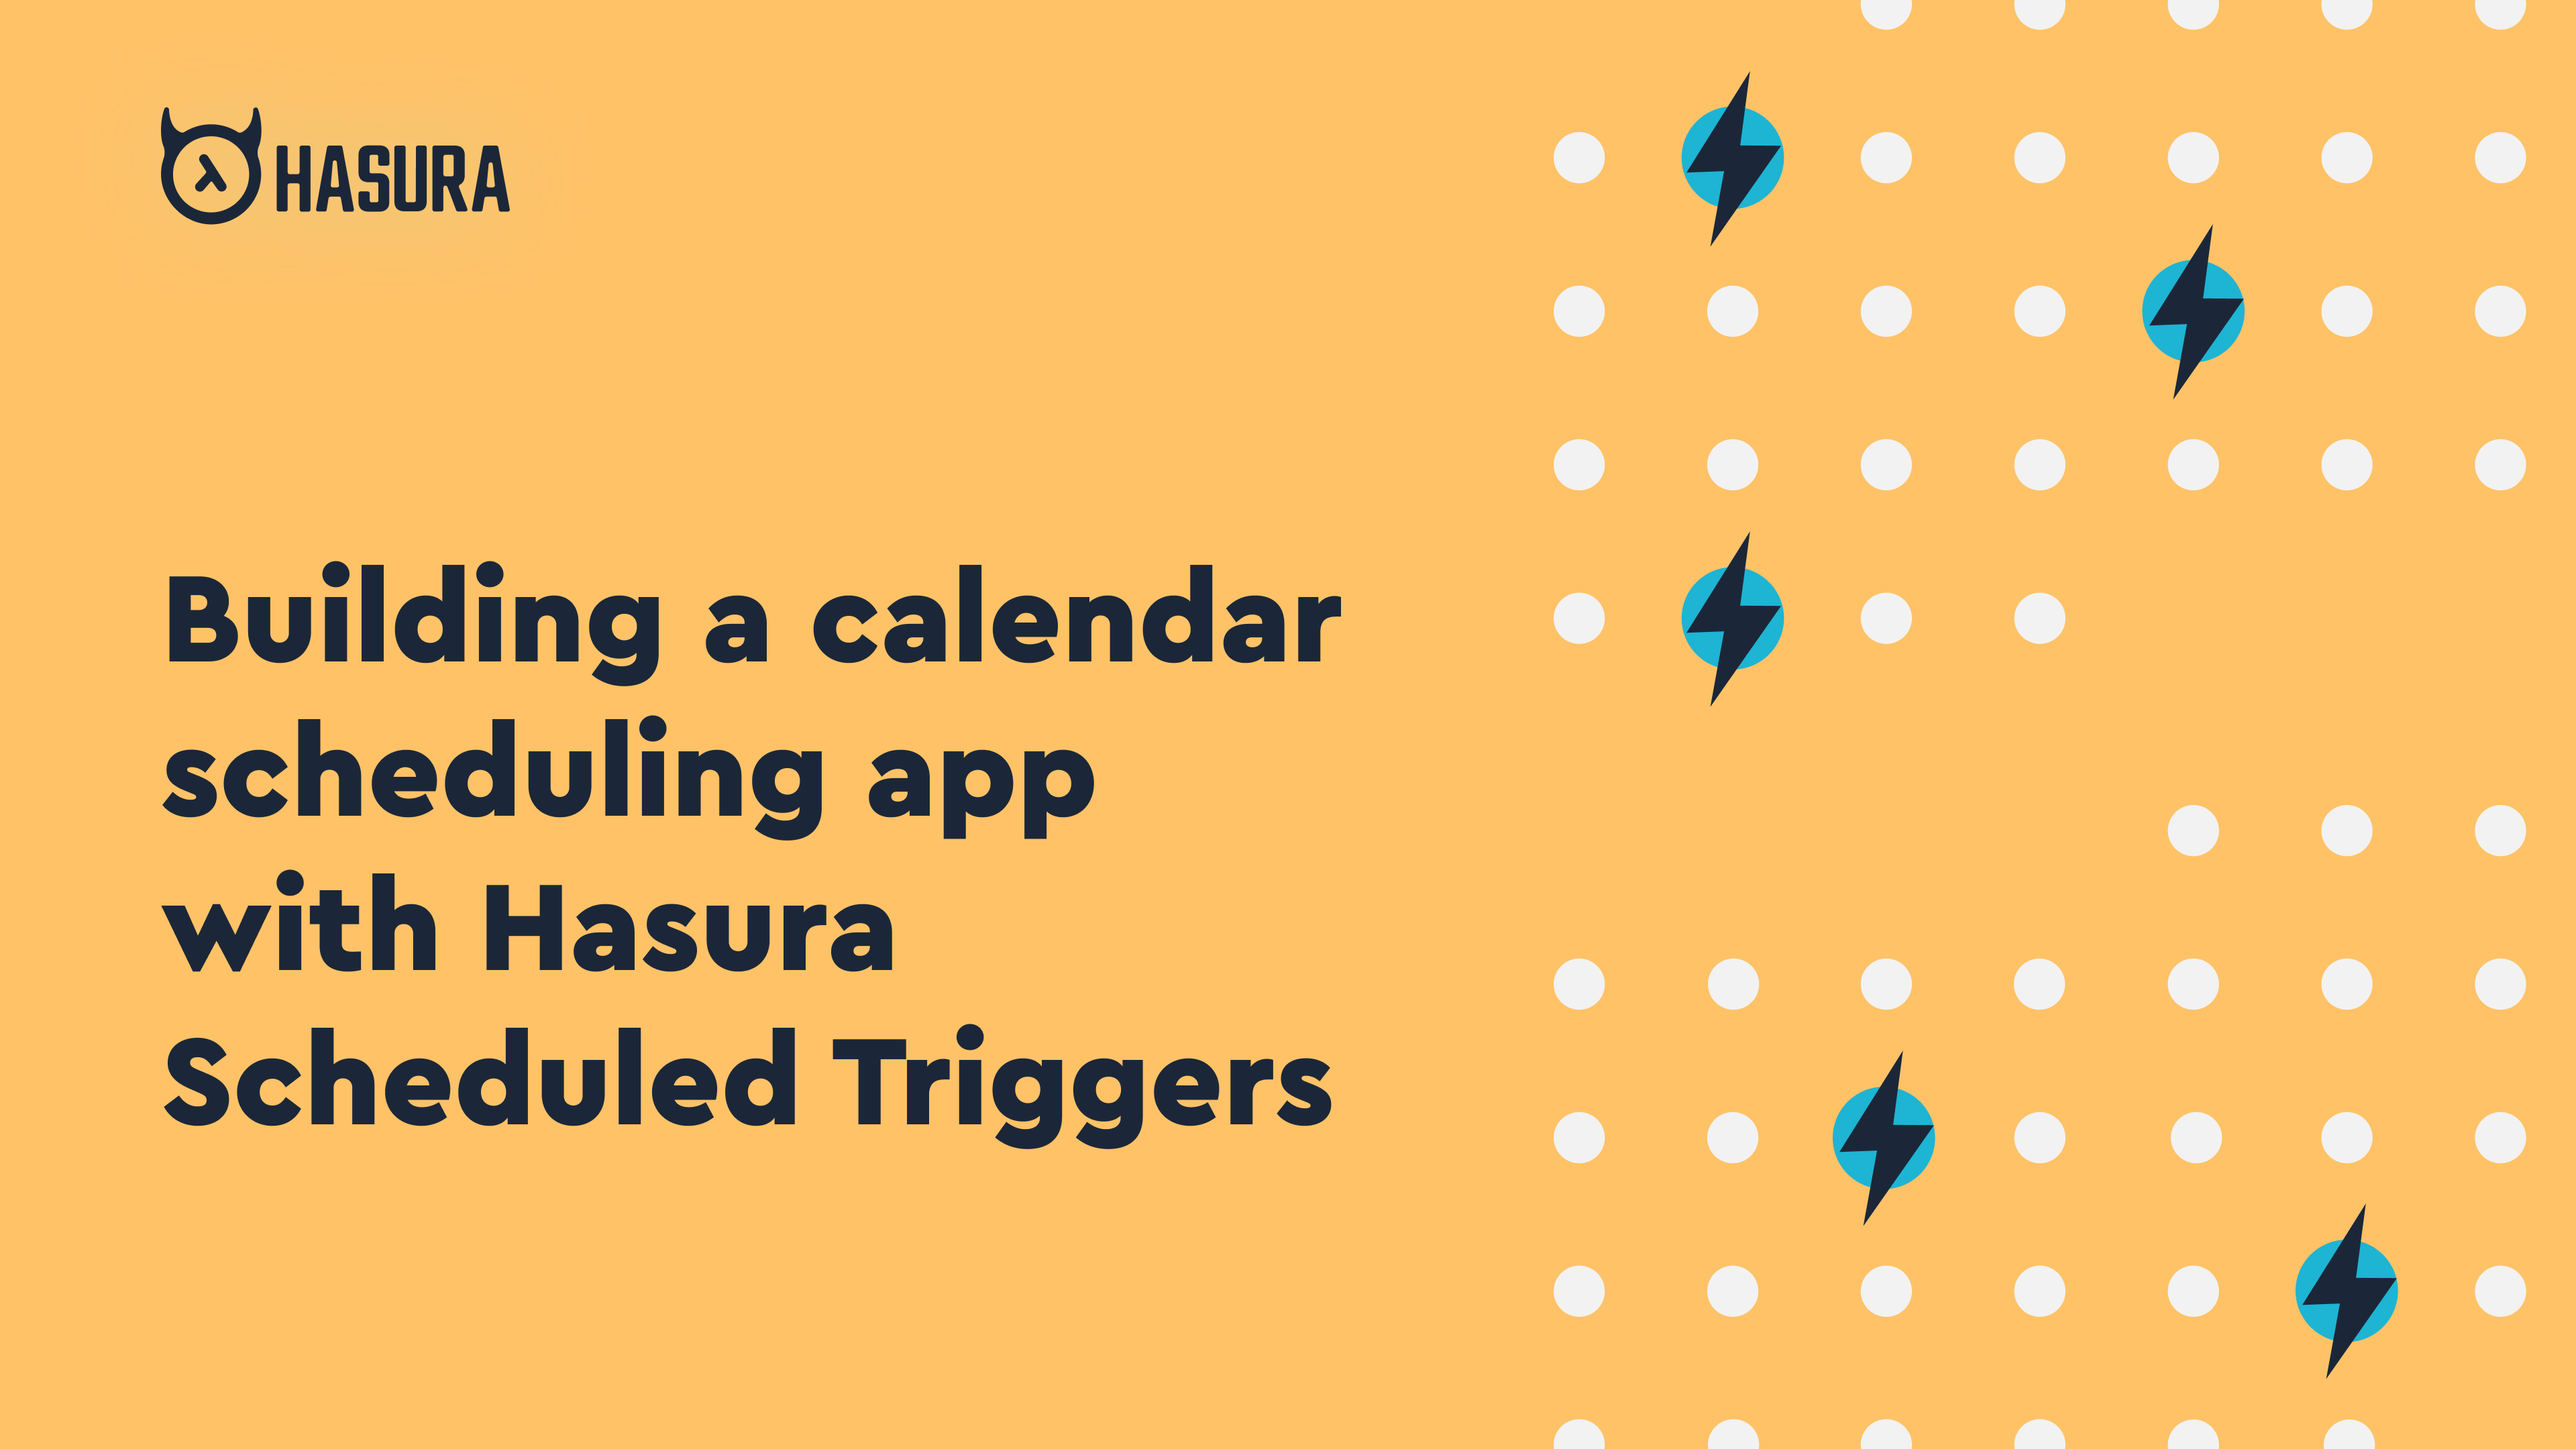 Building a Calendar Scheduling App Backend with Hasura Scheduled Triggers